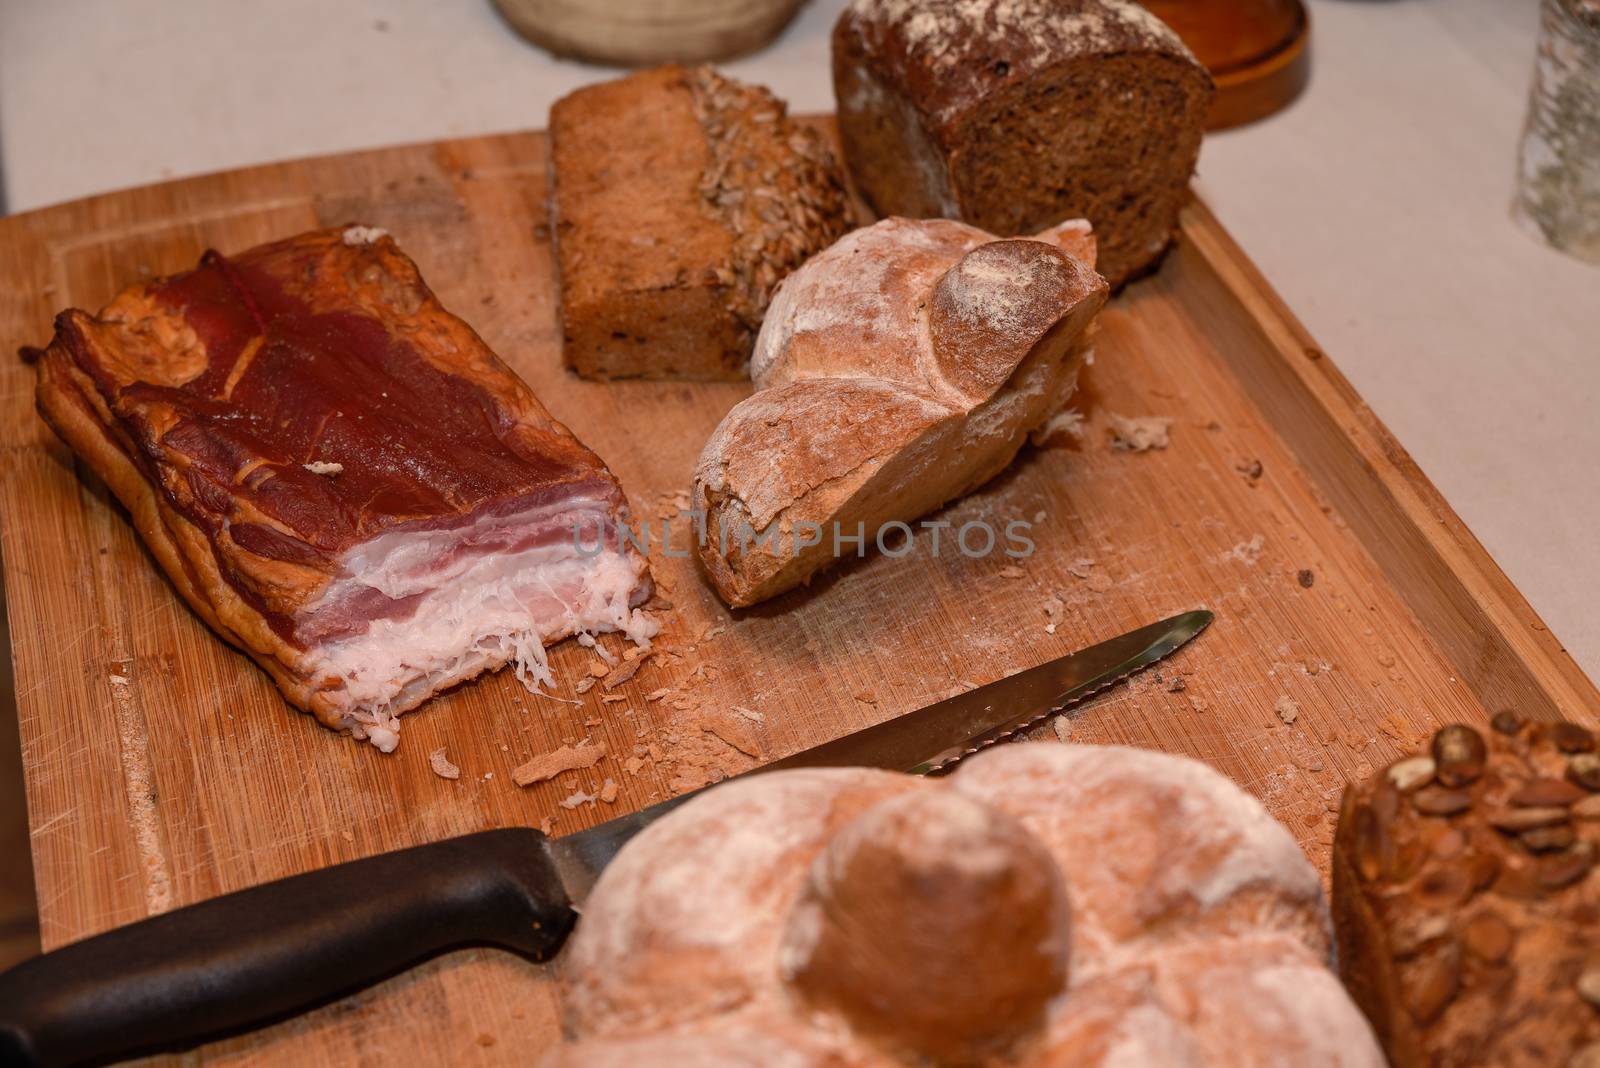 Smoked bacon with bread by RobertChlopas